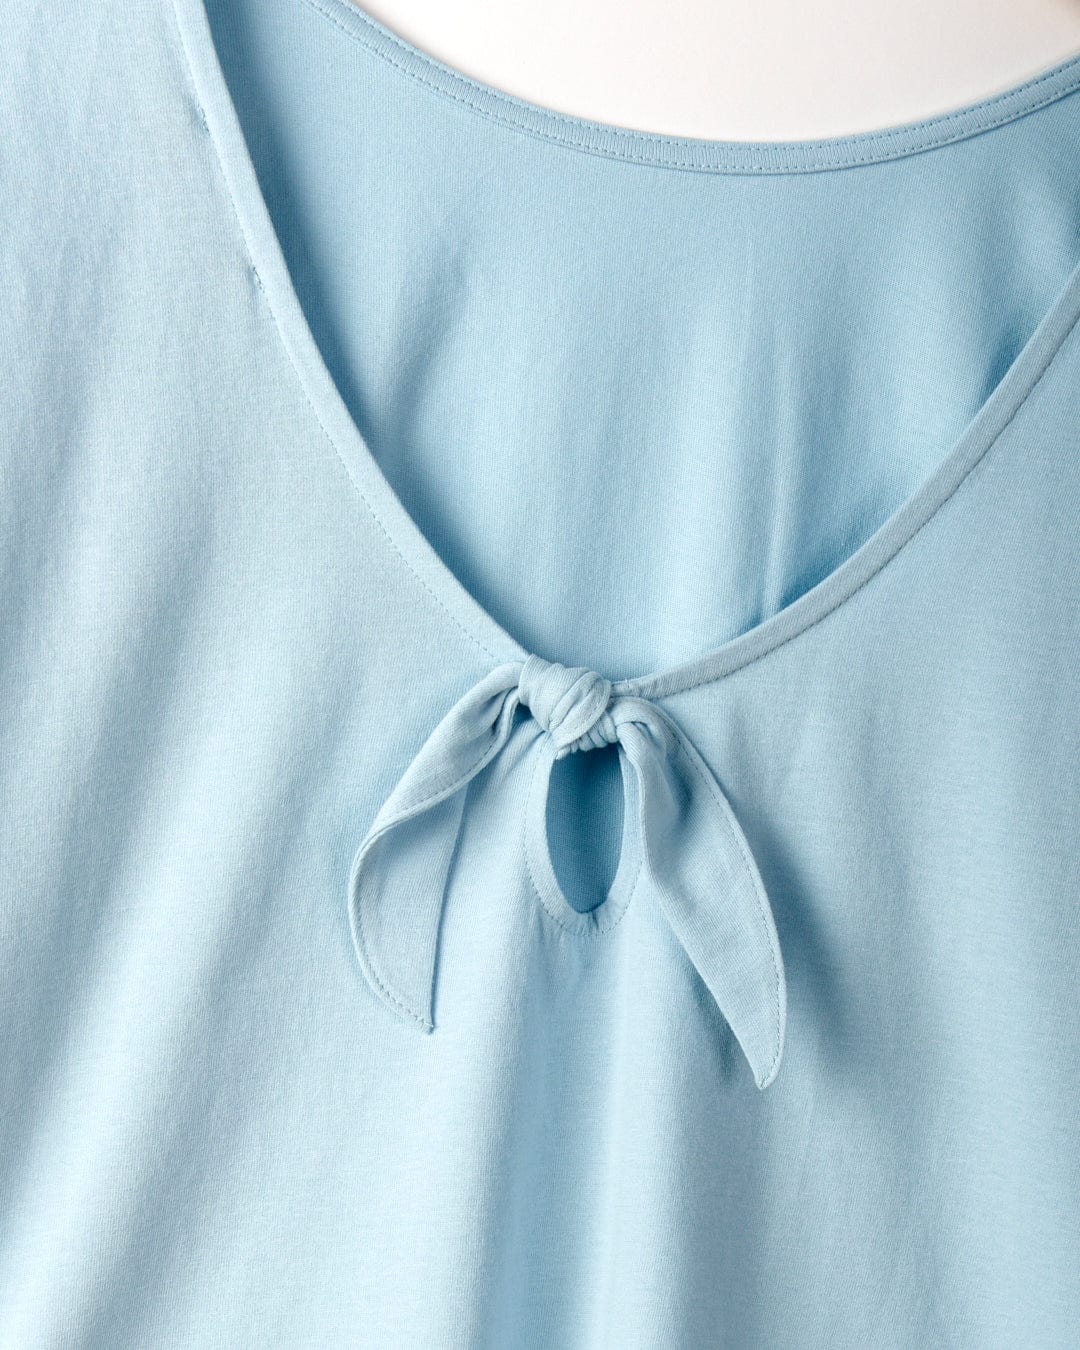 Close-up of a light blue garment made from 100% cotton with a V-shaped neckline featuring a small knot and keyhole detail at the center. The product is the Rhoda - Womens T-Shirt - Light Blue by Saltrock.